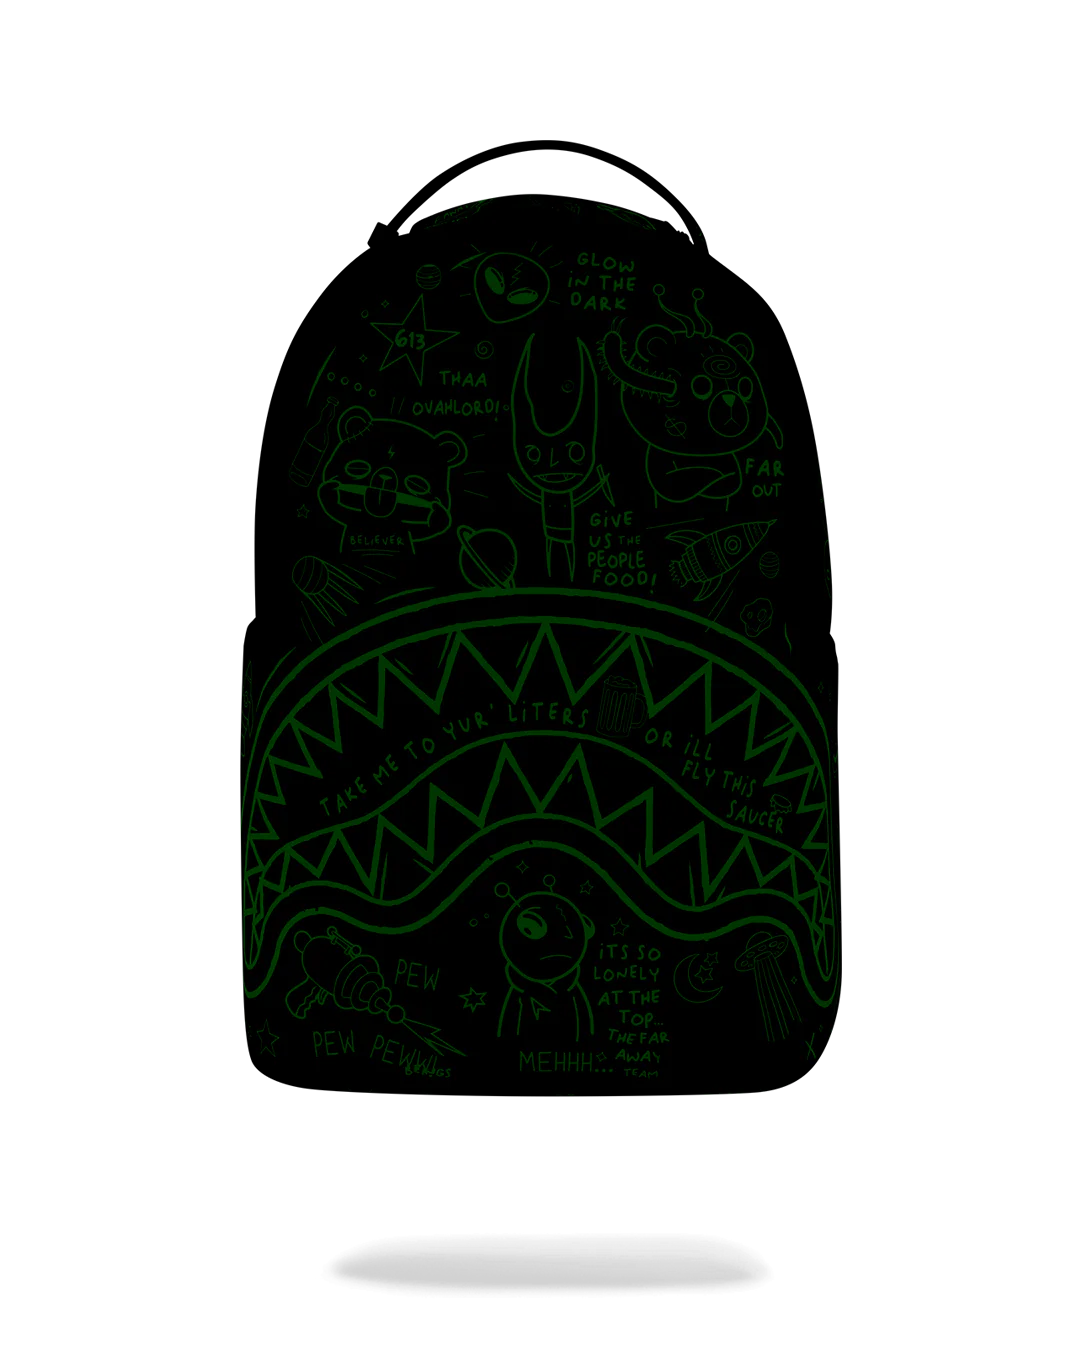 SPRAYGROUND GLOW THE SPACE BACKPACK (GLOW IN THE DARK EFFECT)